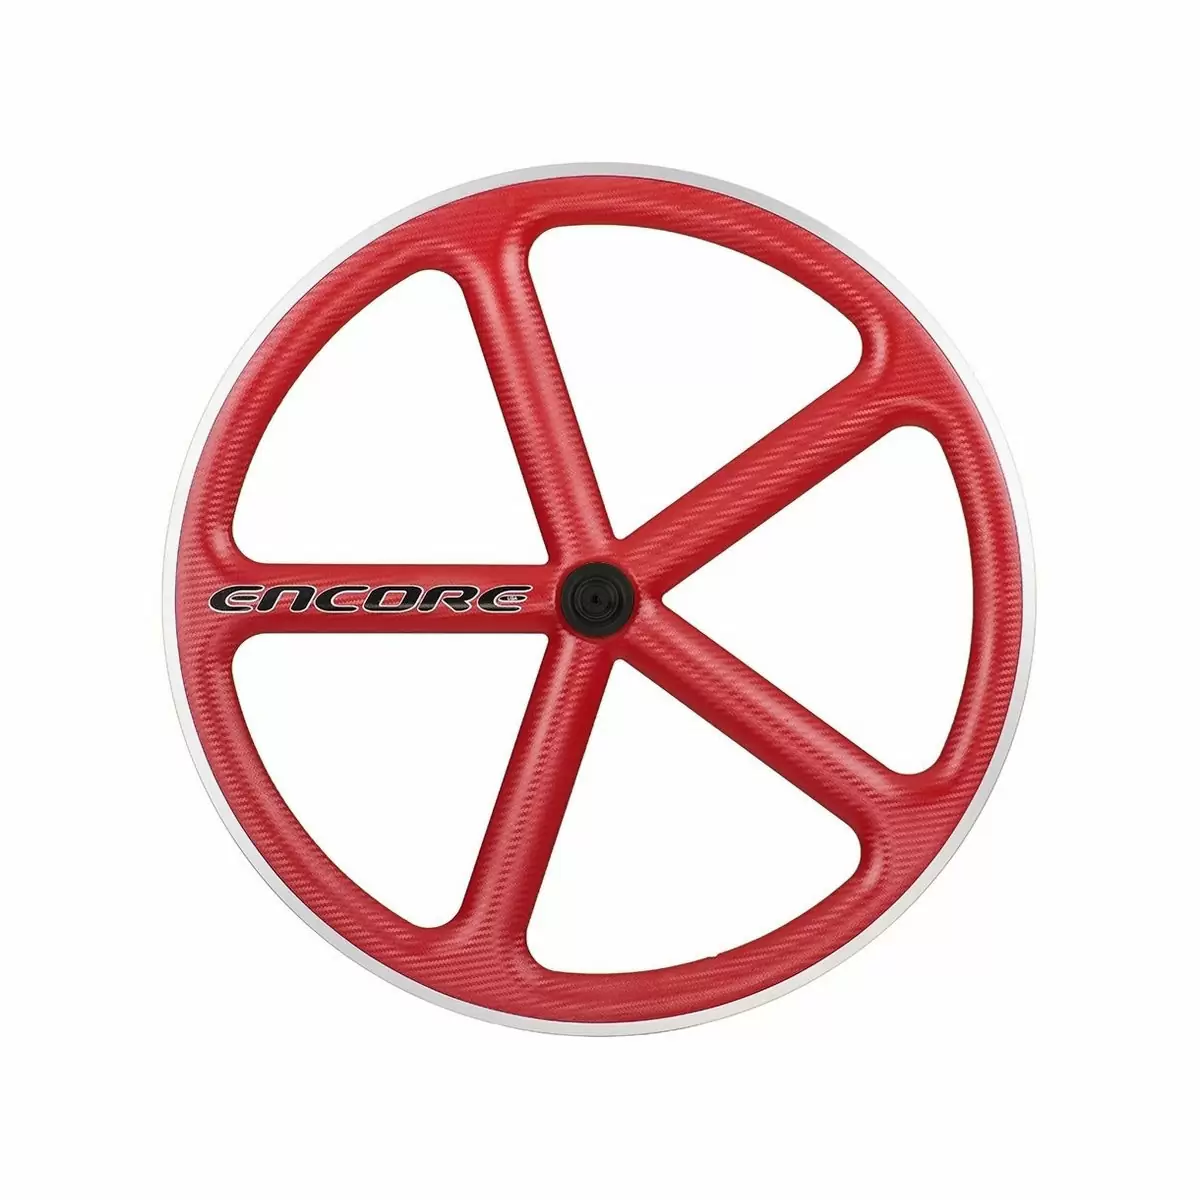 roue avant 700c track 5 rayons carbone tissage rouge msw - image